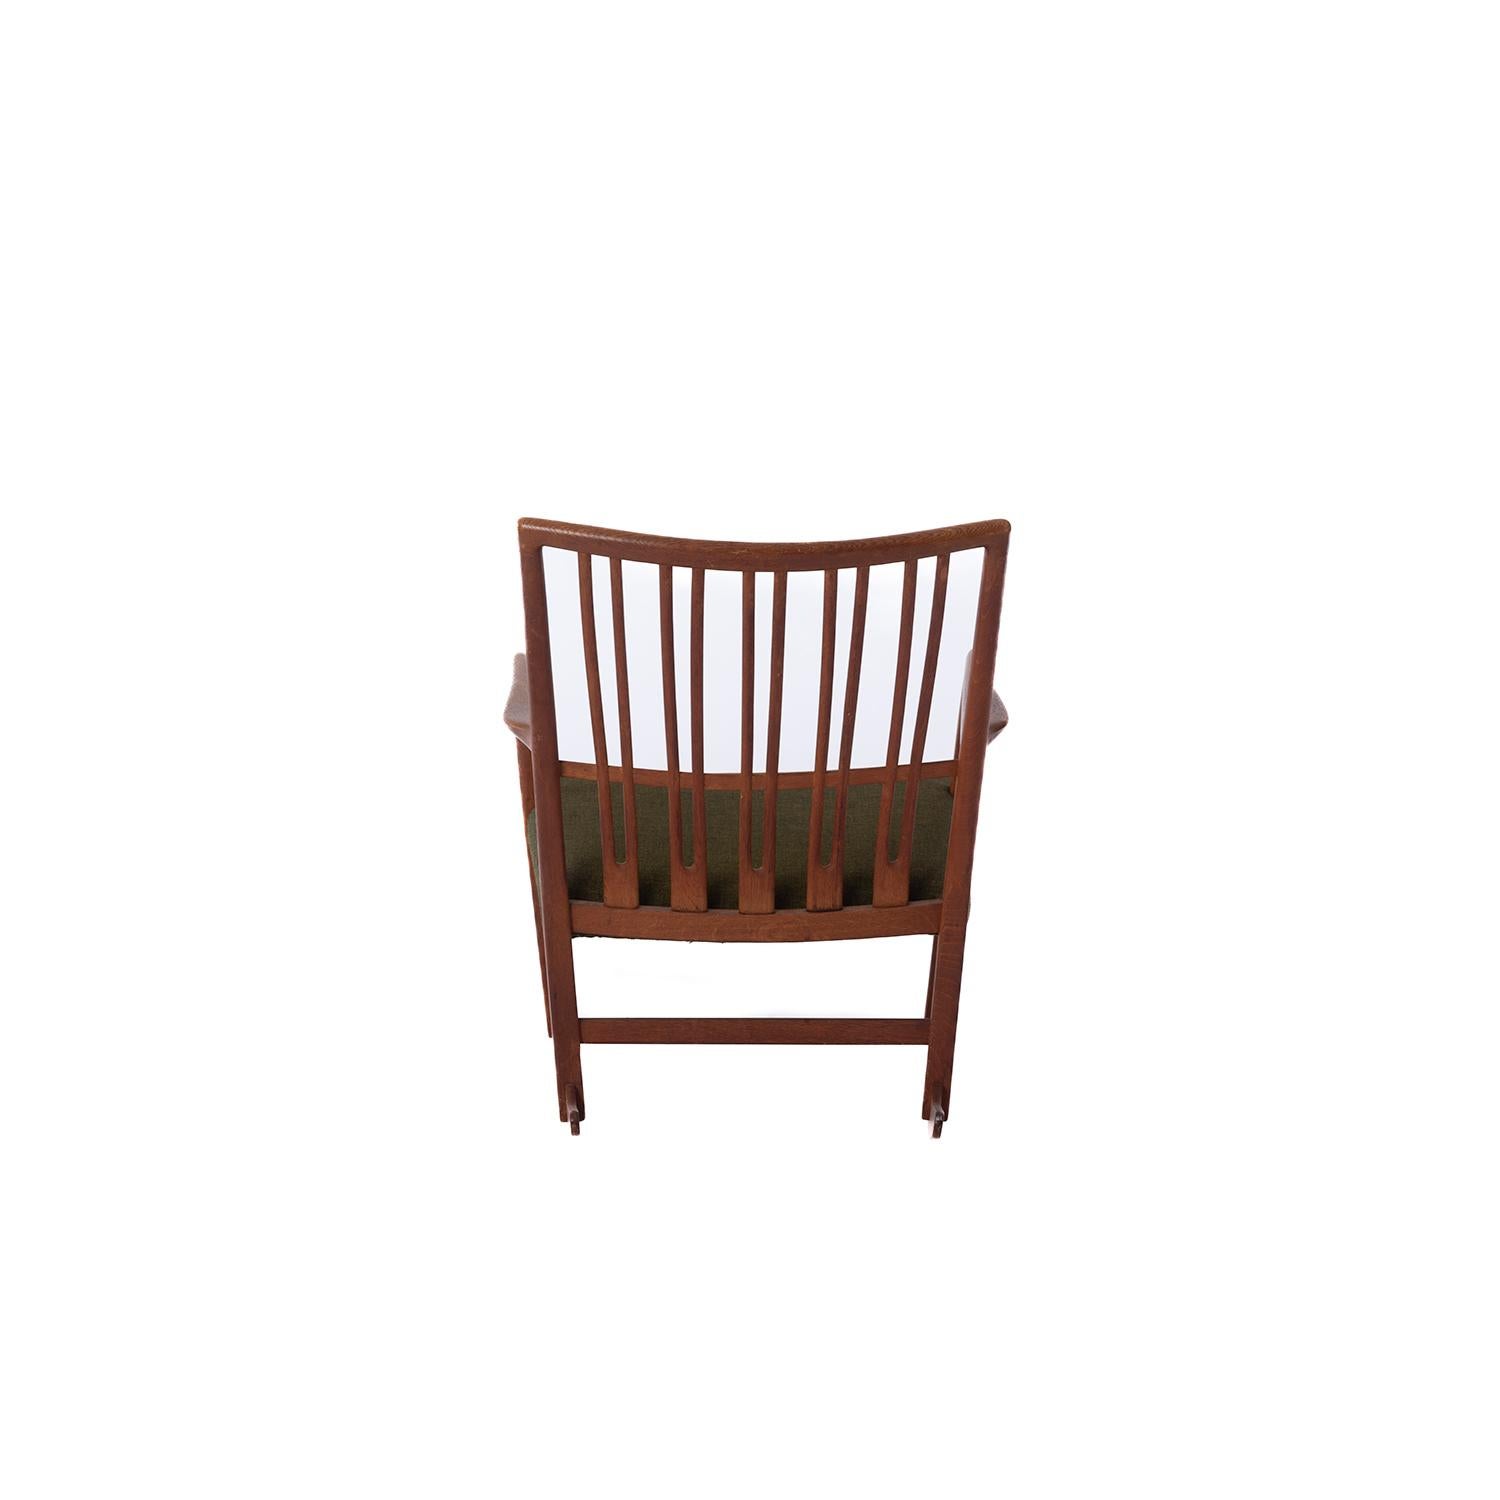 Hans Wegner Oak Rocking Chair In Excellent Condition For Sale In Minneapolis, MN